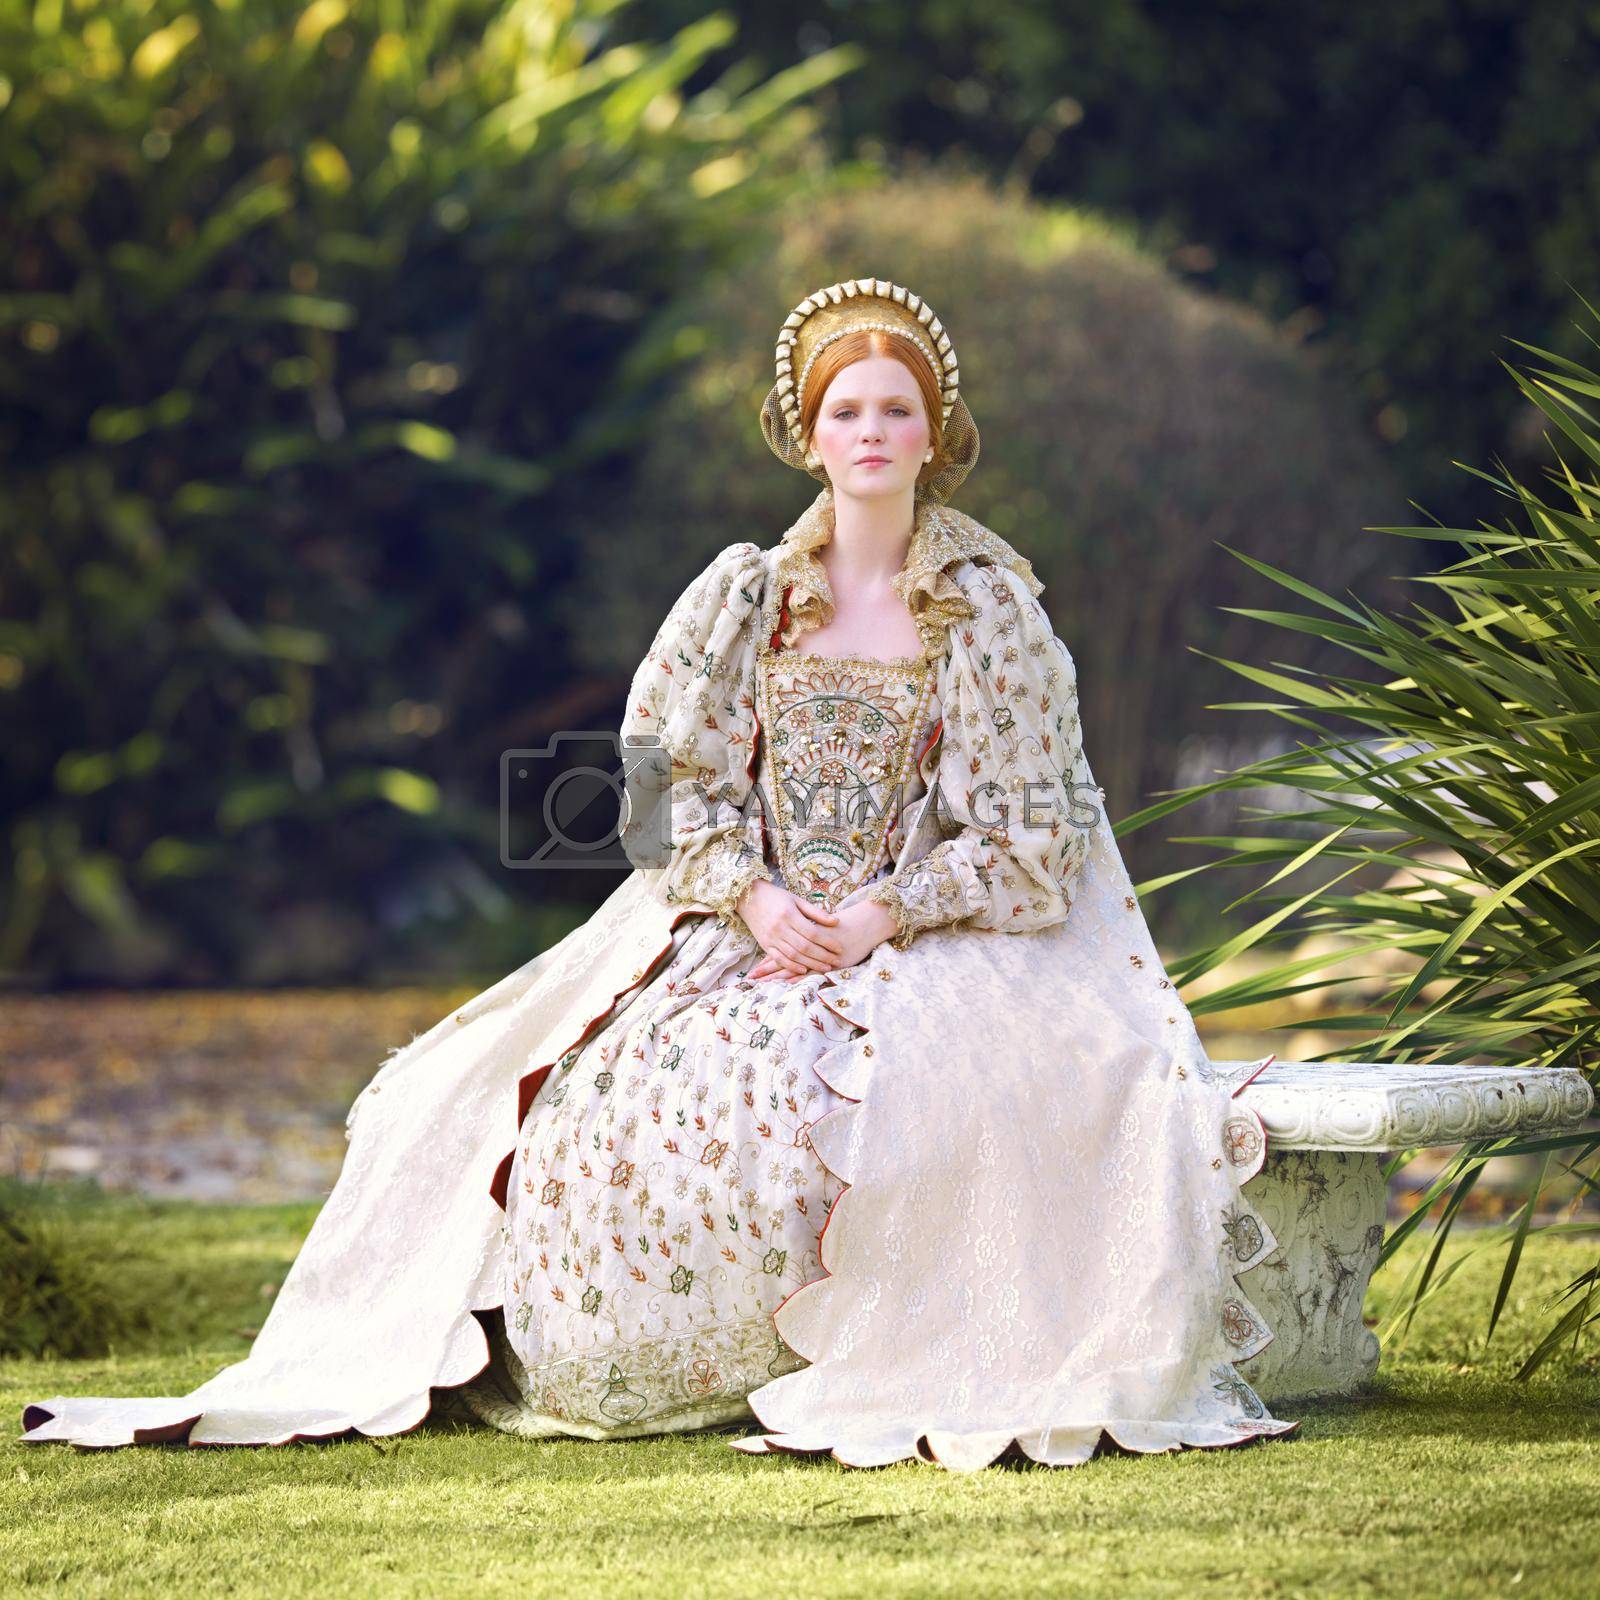 Royalty free image of Awaiting her king. Portrait of a noble woman sitting outdoors on palace grounds. by YuriArcurs